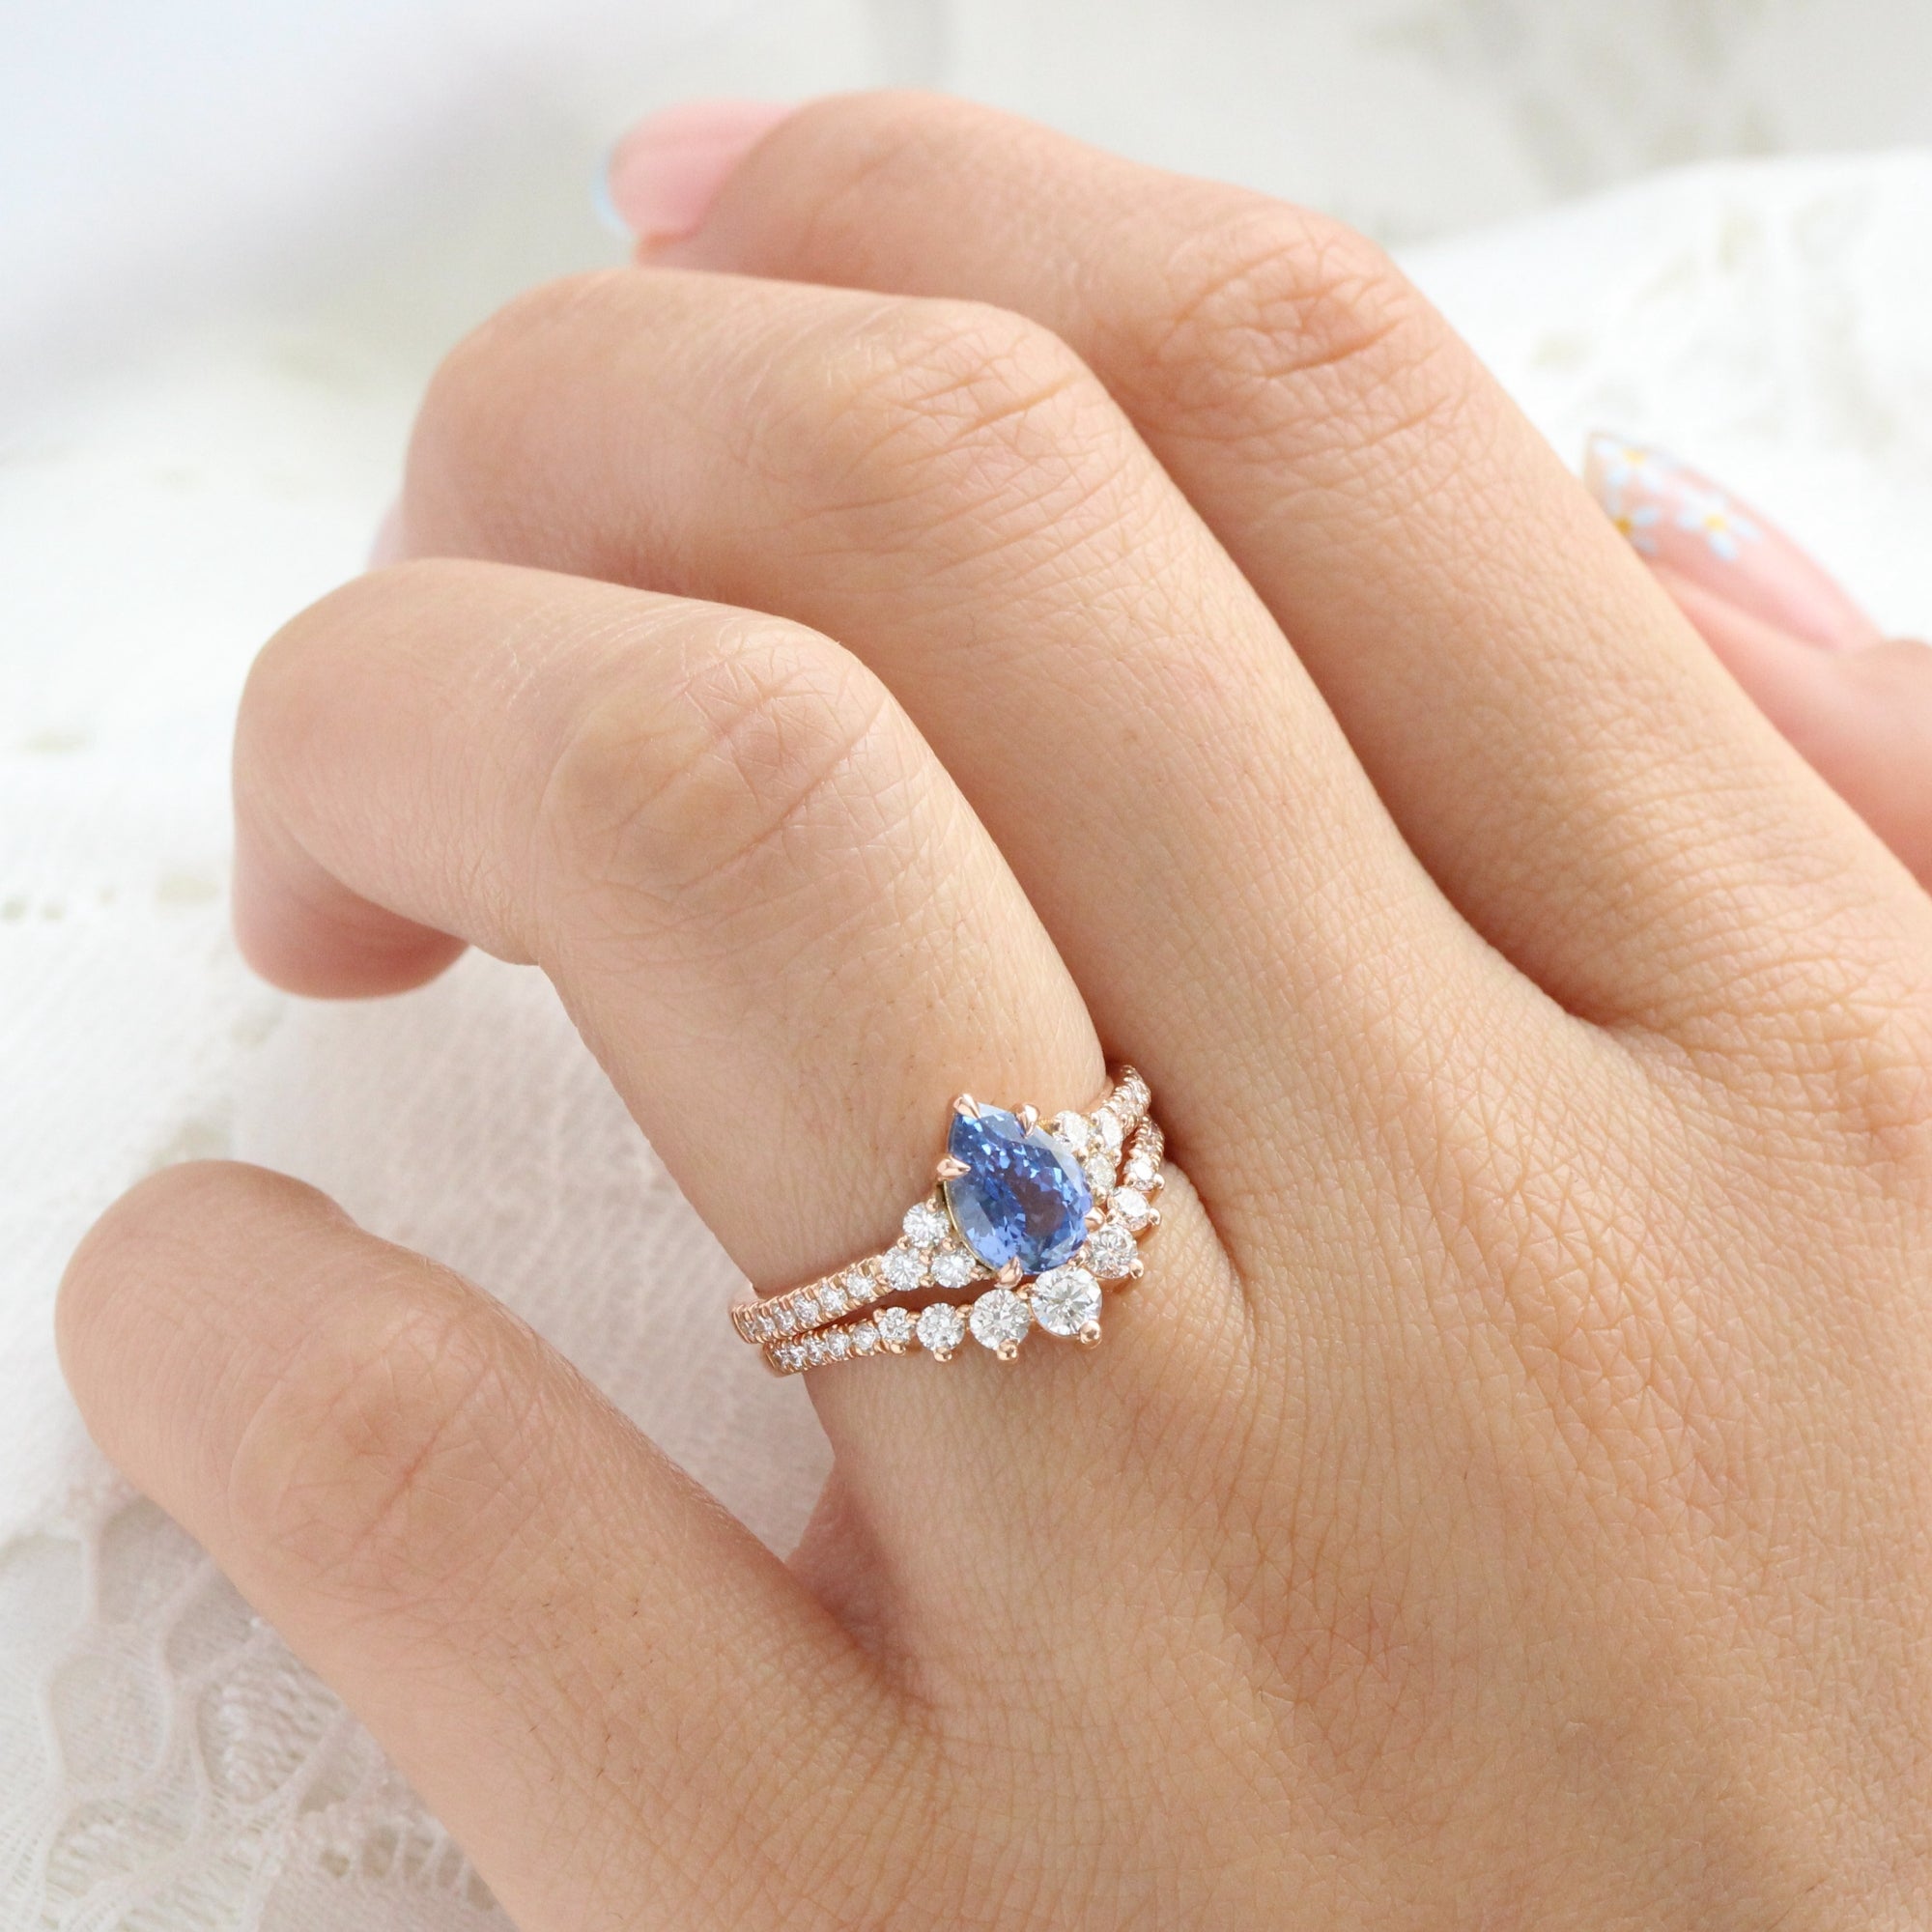 White Gold Ring with Oval Sapphire and Brilliants | KLENOTA